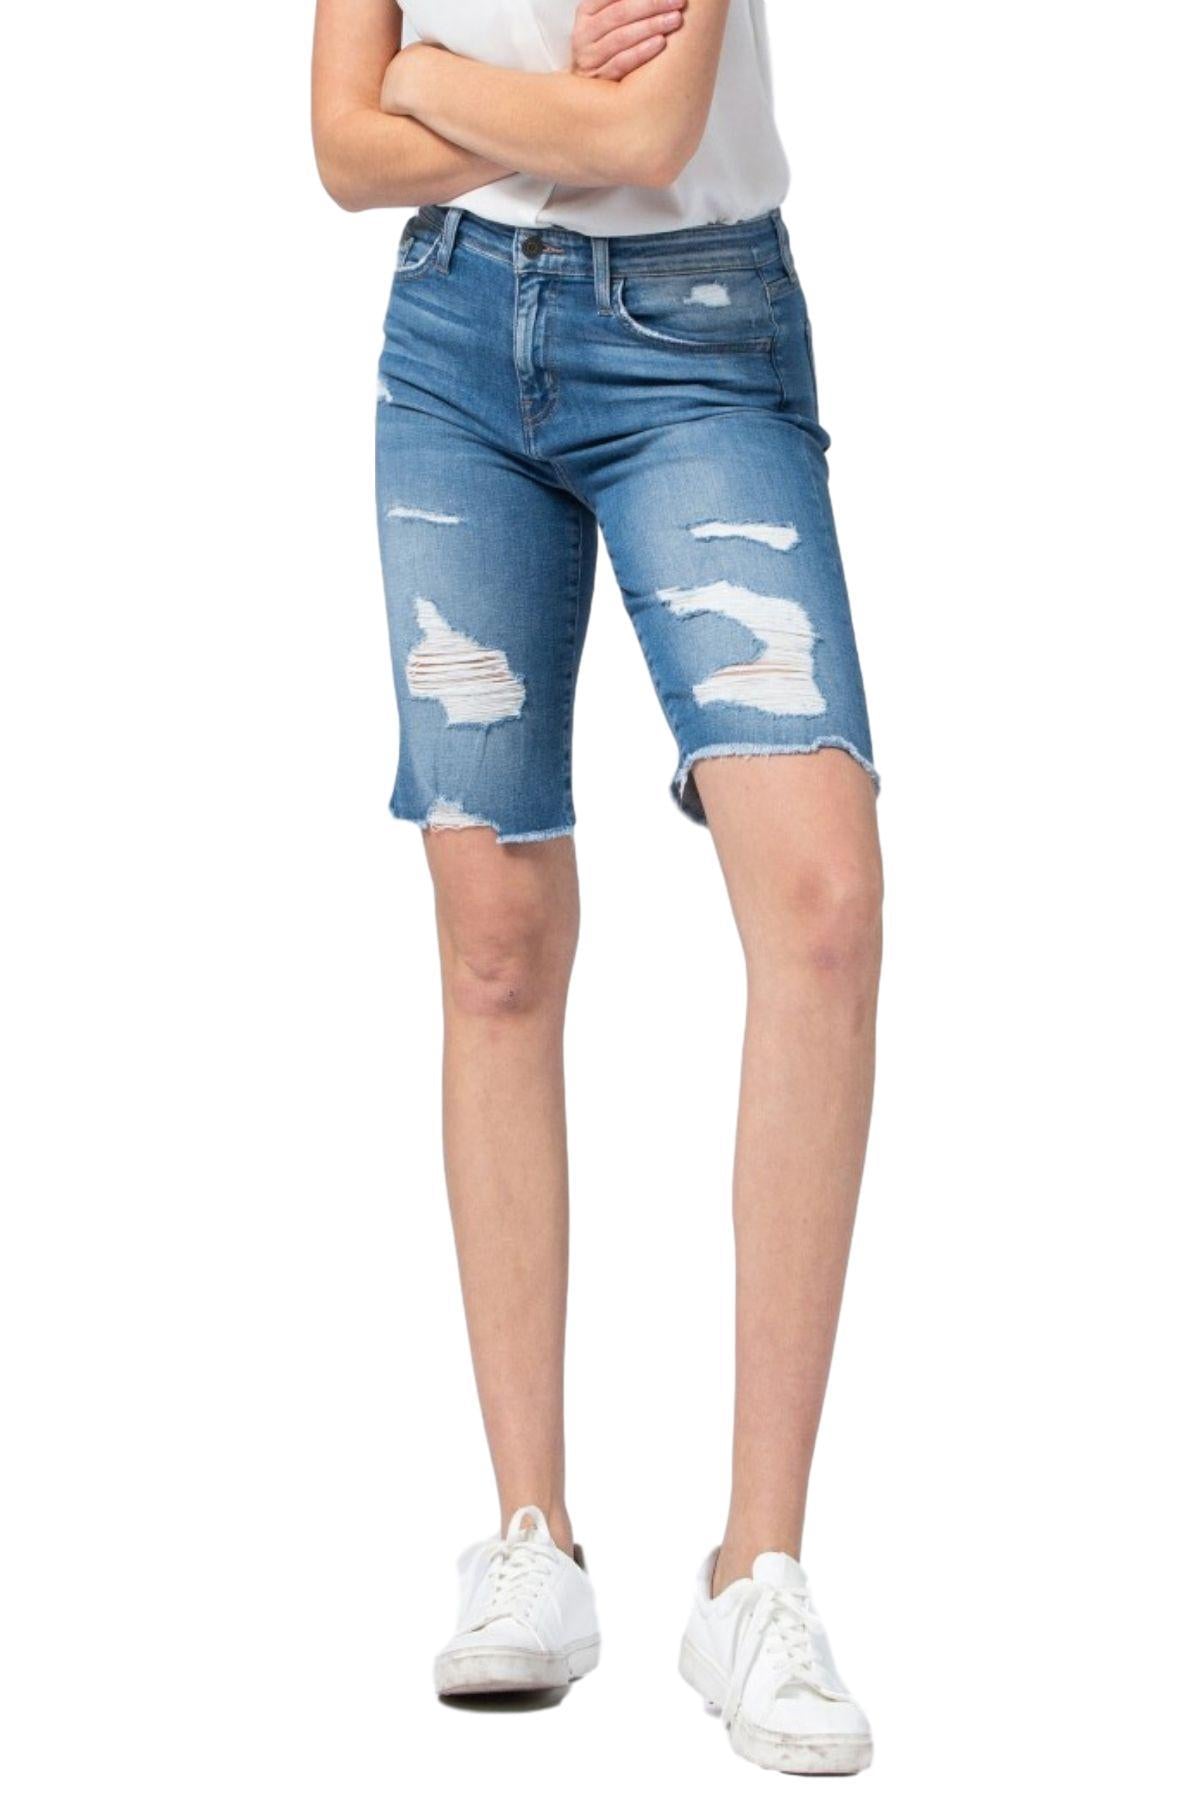 Flying Monkey Jeans  Collection: January 2020 Style Name: Pixel Color: Distressed Medium Wash Rise: High Rise, 10" Front Rise Cut: Bermudas, 13" Inseam Material: 93% COTTON, 5% POLYESTER(T400), 2% LYCRA®SPANDEX Fly: Zipper  Style #: Y2880   Contact us for any additional measurements or sizing.   Sizes Compared To Women's Size 24/00 25/0 26/2 27/4 28/6 29/8 30/10  Sizes Compared To Juniors Size 24/0 25/1 26/3 27/5 28/7 29/9 30/11